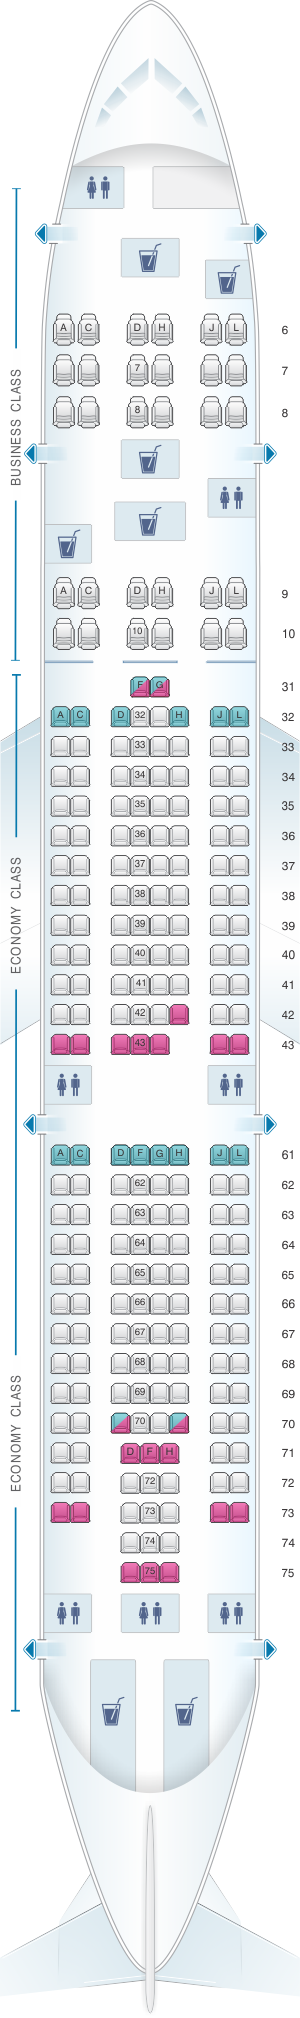 Seat Map China Eastern Airlines Airbus A330 200 Config2 Seatmaestro